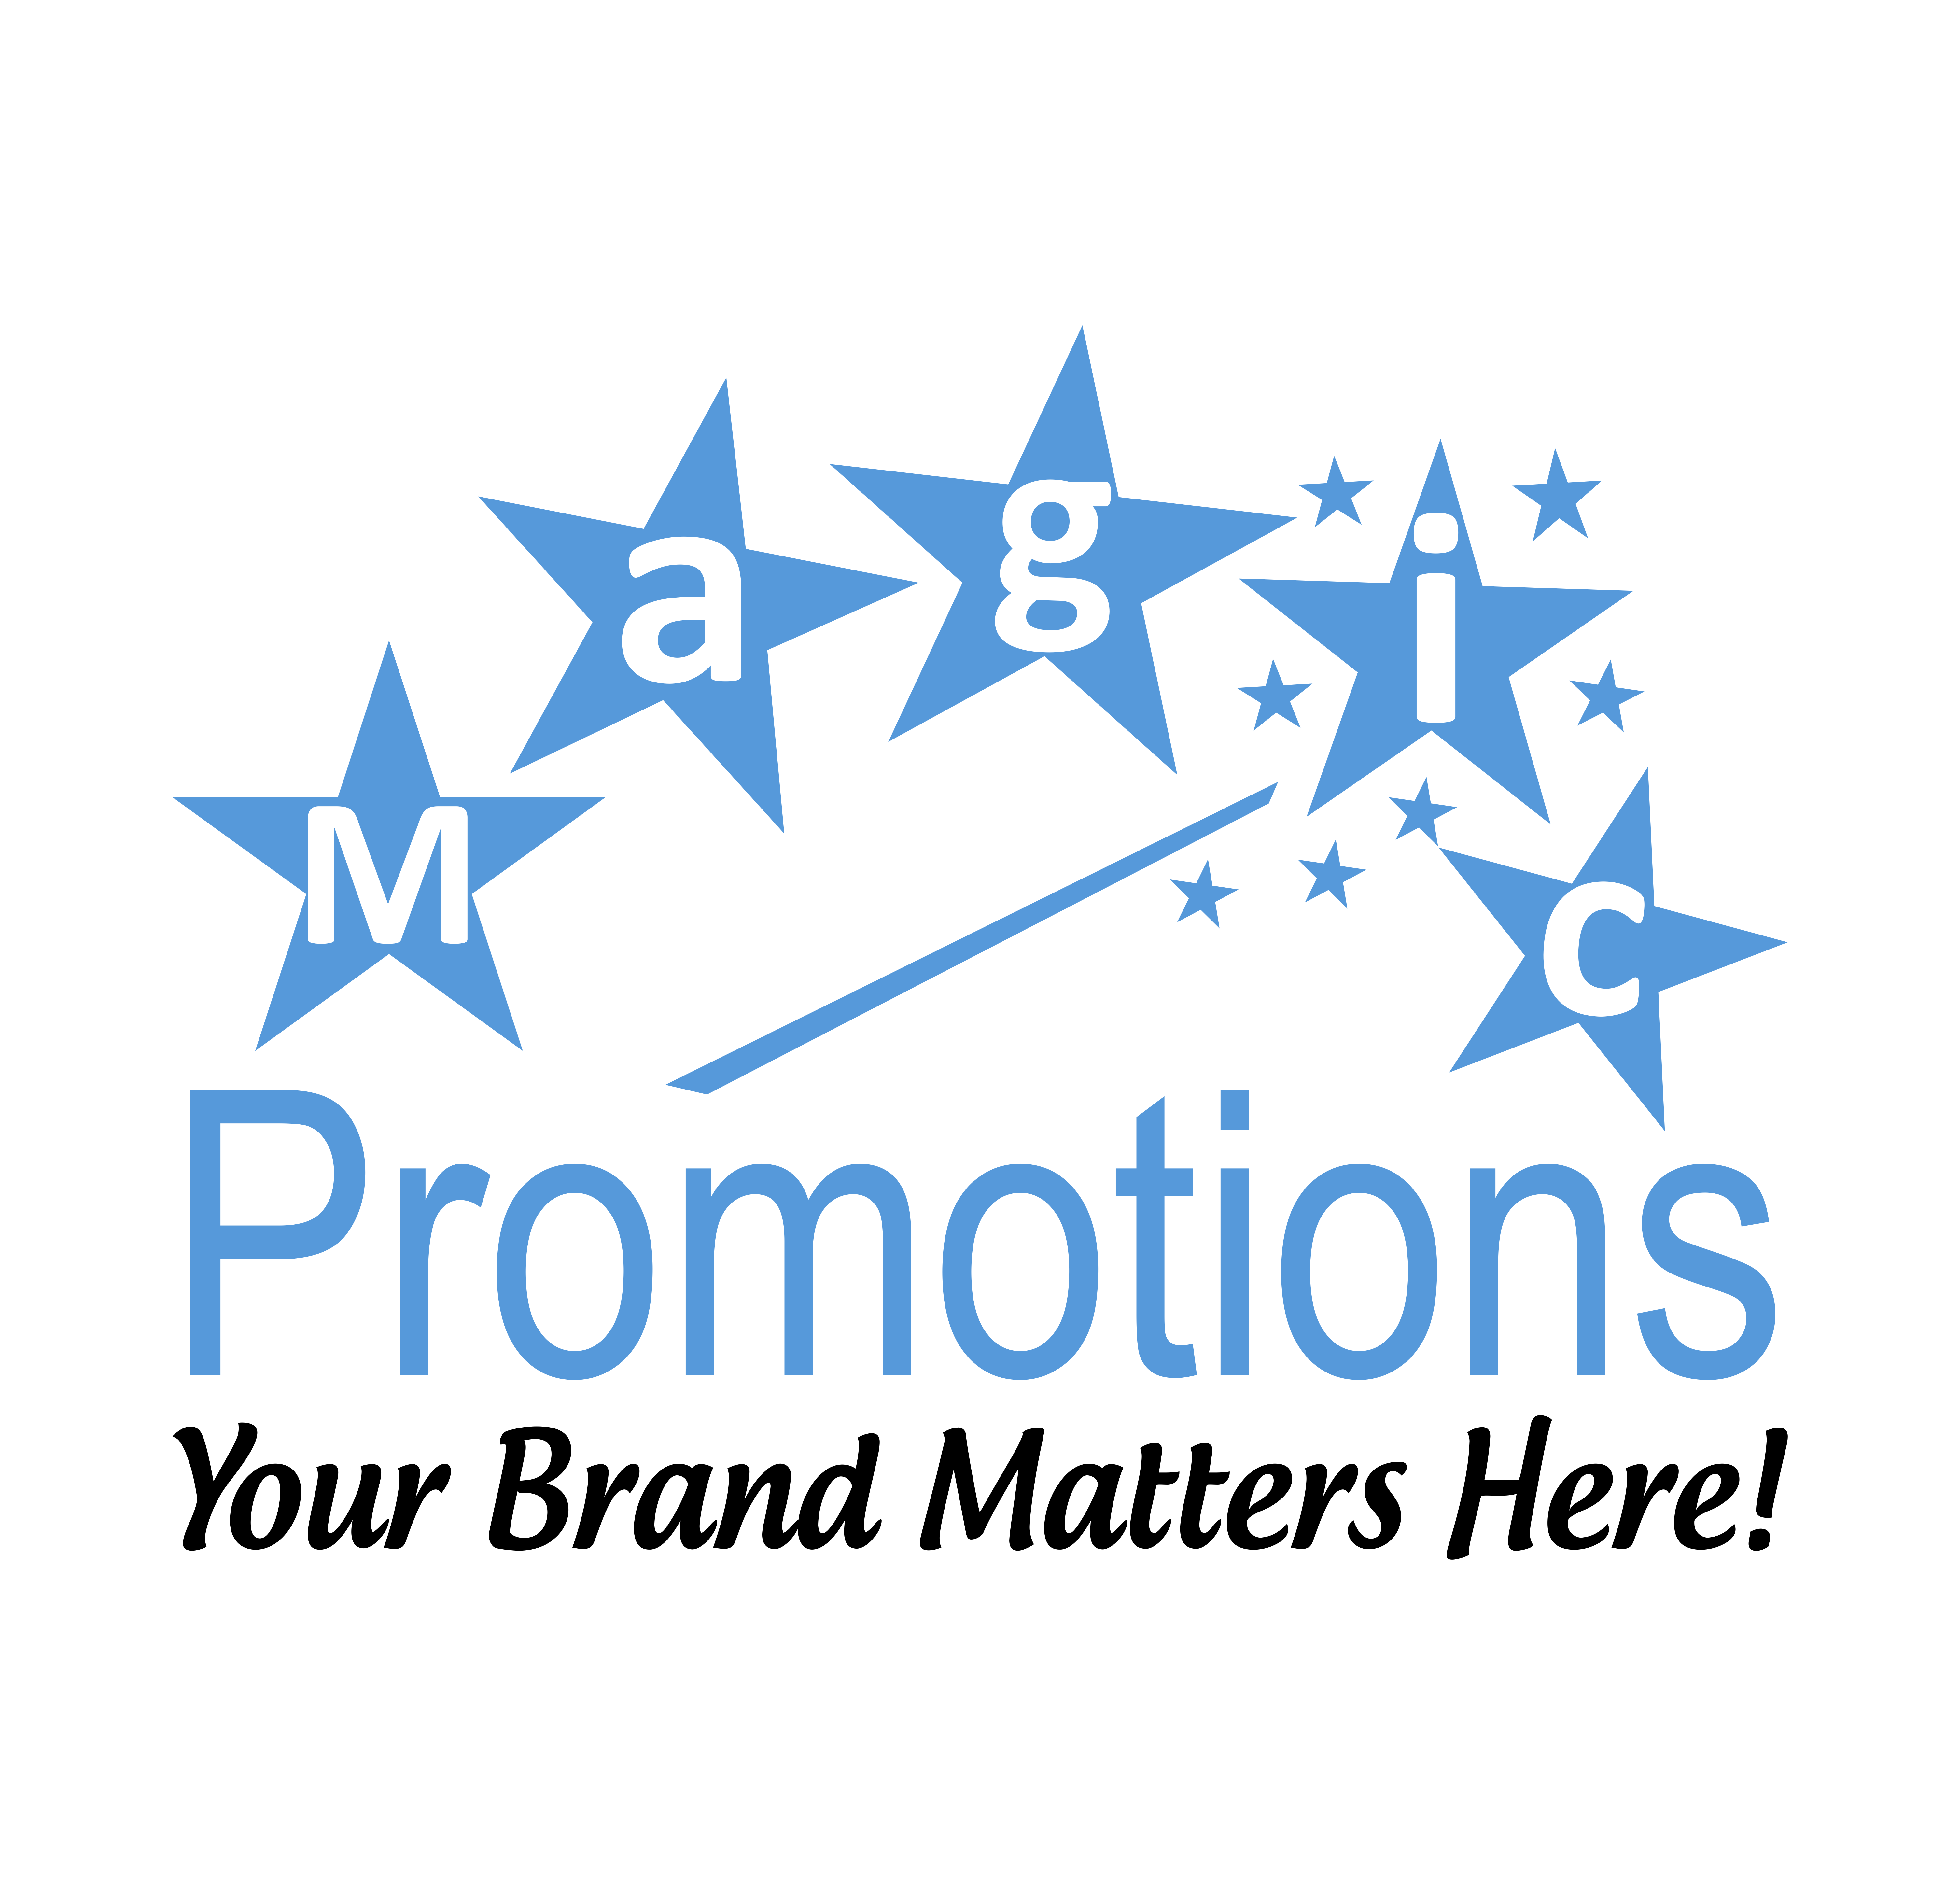 Product Results - Magic Promotions, Inc.